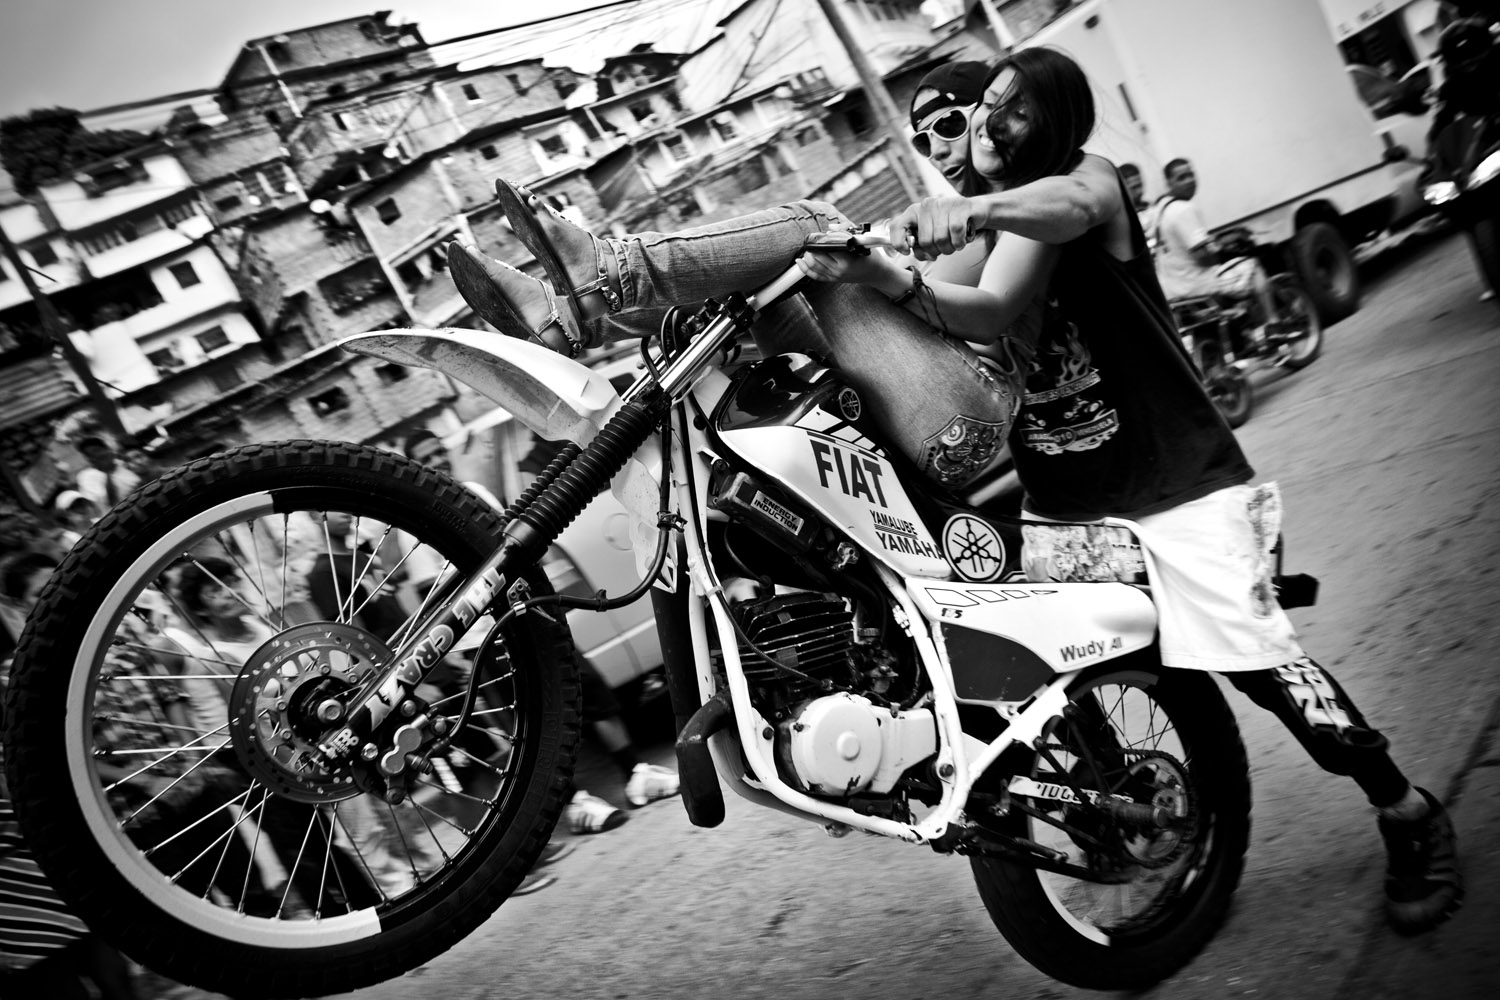 Motorcycle stunts in Caracas. Motorcycles, like cellphones, are some of the most coveted objects in the city, and are the source of a number of conflicts.